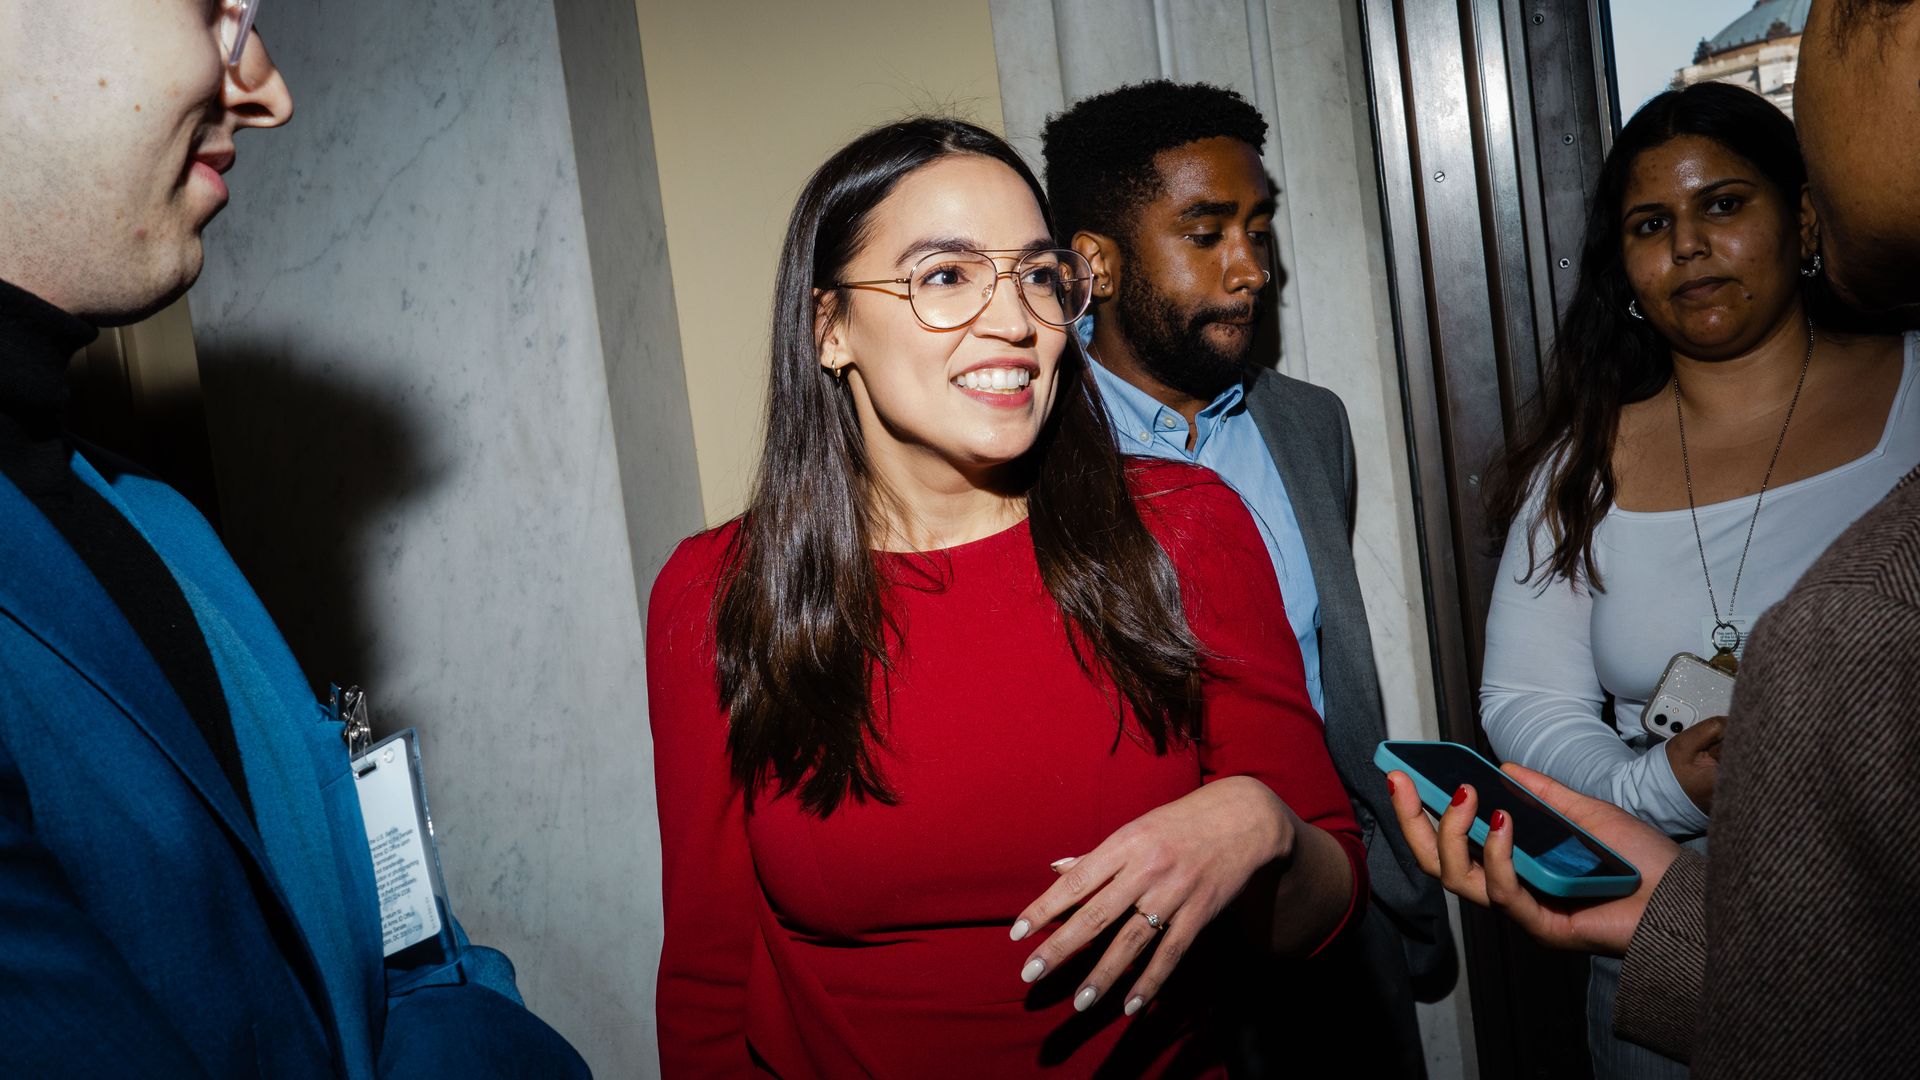 Rep. Alexandria Ocasio Cortez, wearing a red dress and glasses.